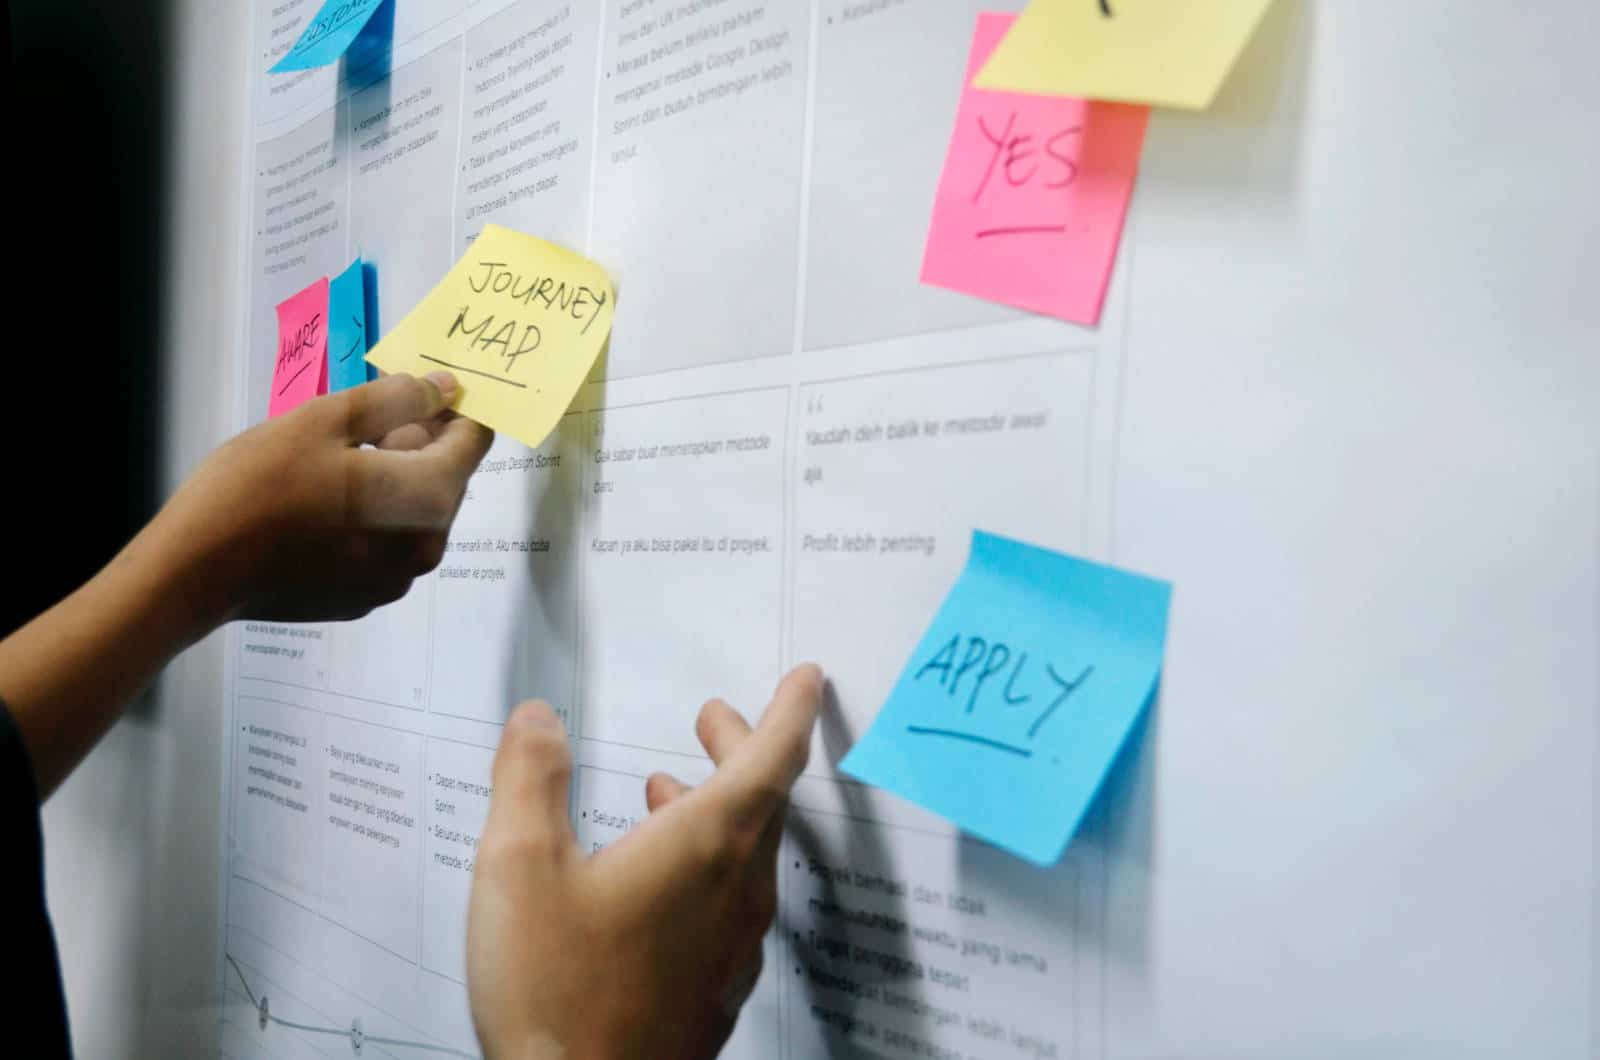 Hands putting Post-It Notes on a whiteboard. Photo by UX Indonesia on Unsplash